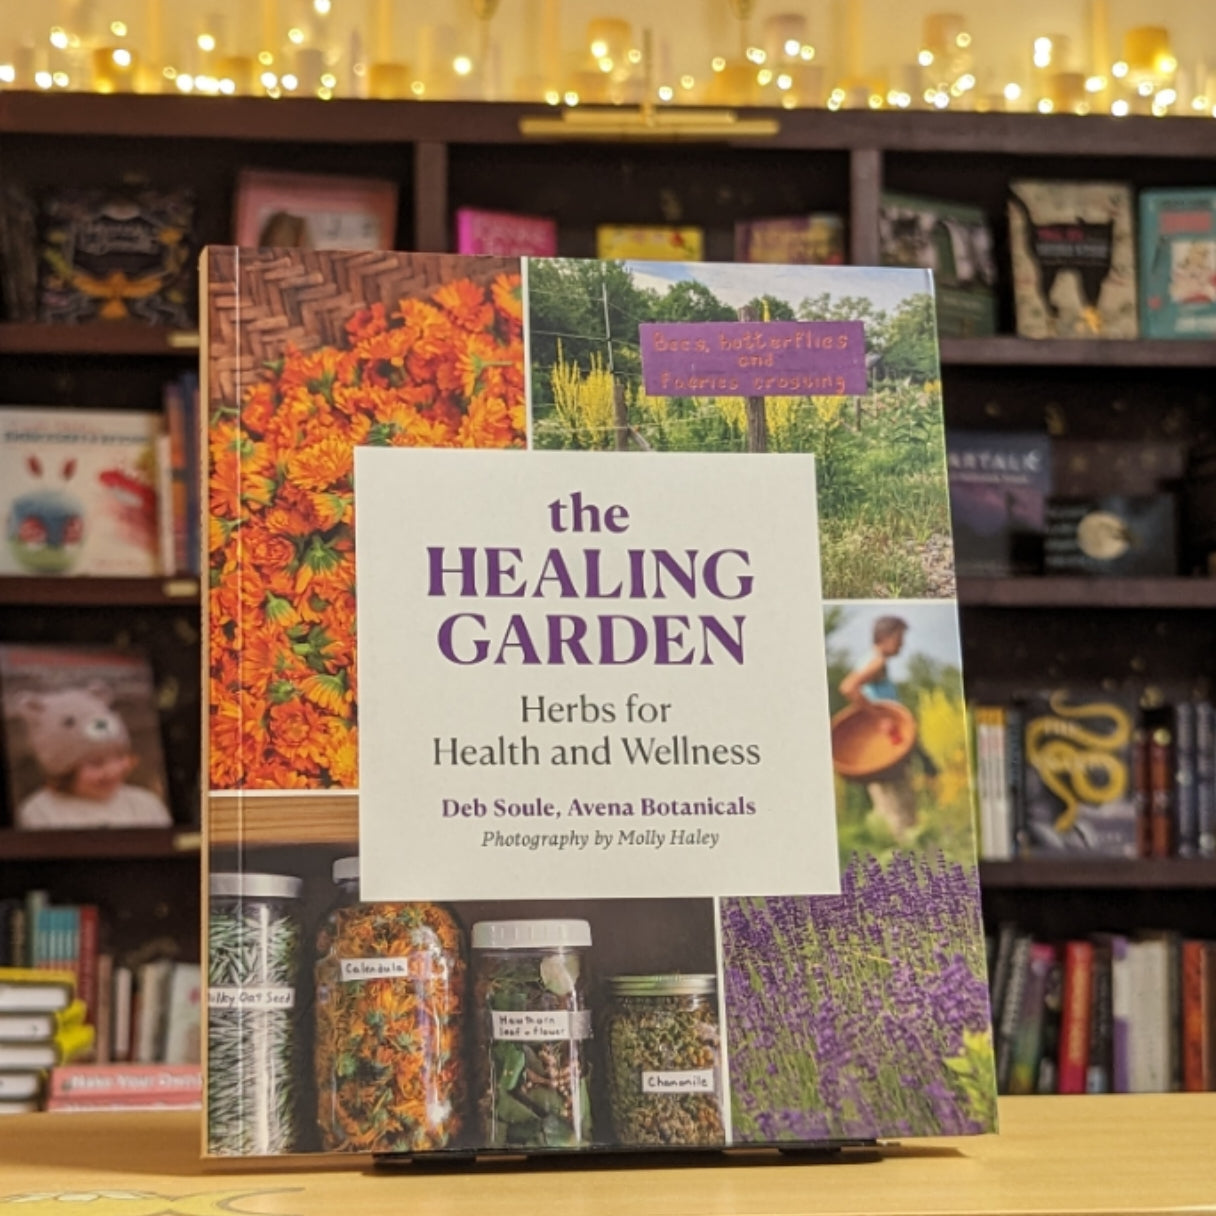 The Healing Garden: Herbal Plants for Health and Wellness